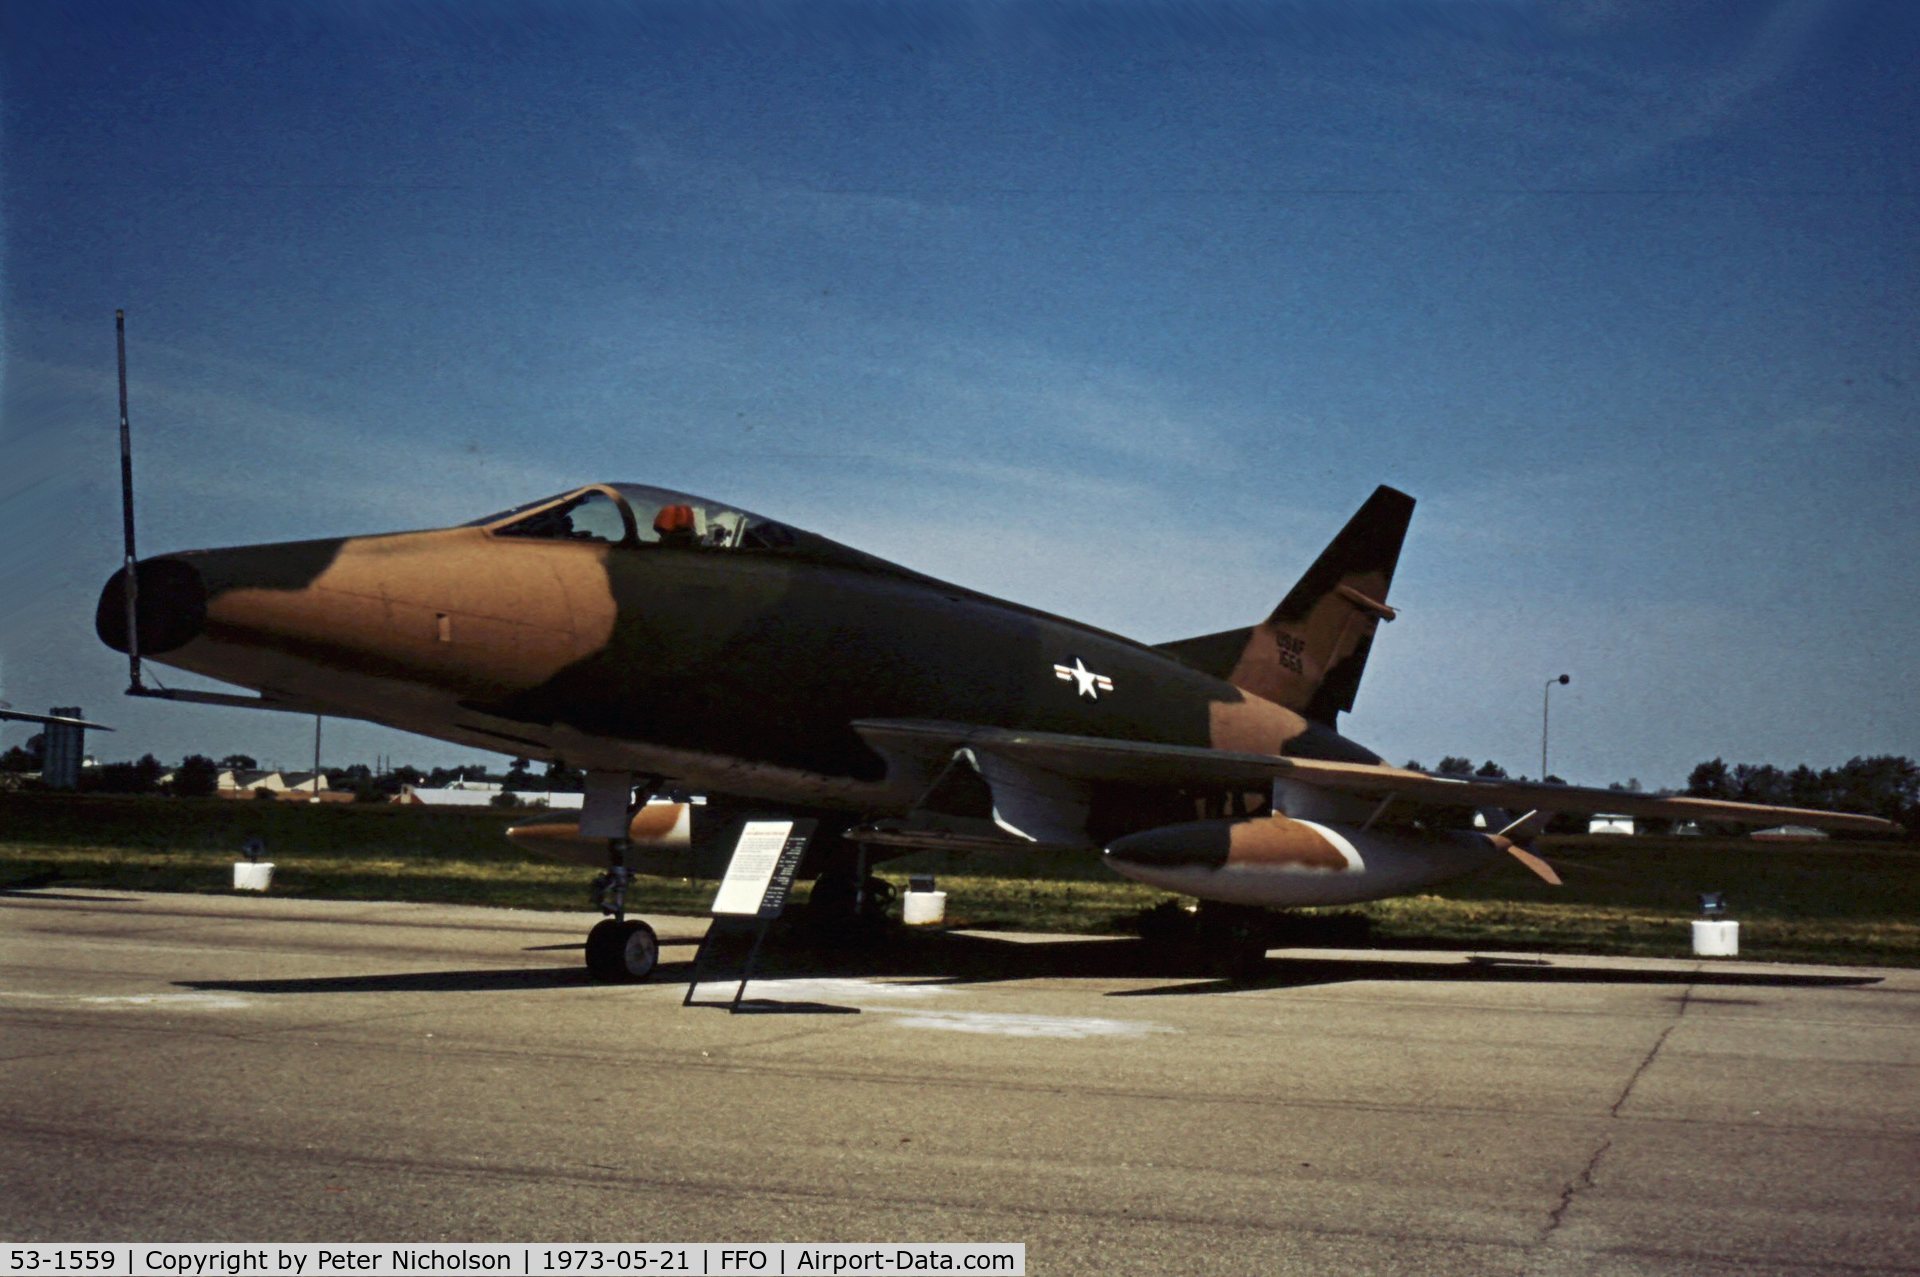 53-1559, 1953 North American F-100A Super Sabre C/N 192-54, As displayed in the summer of 1973.